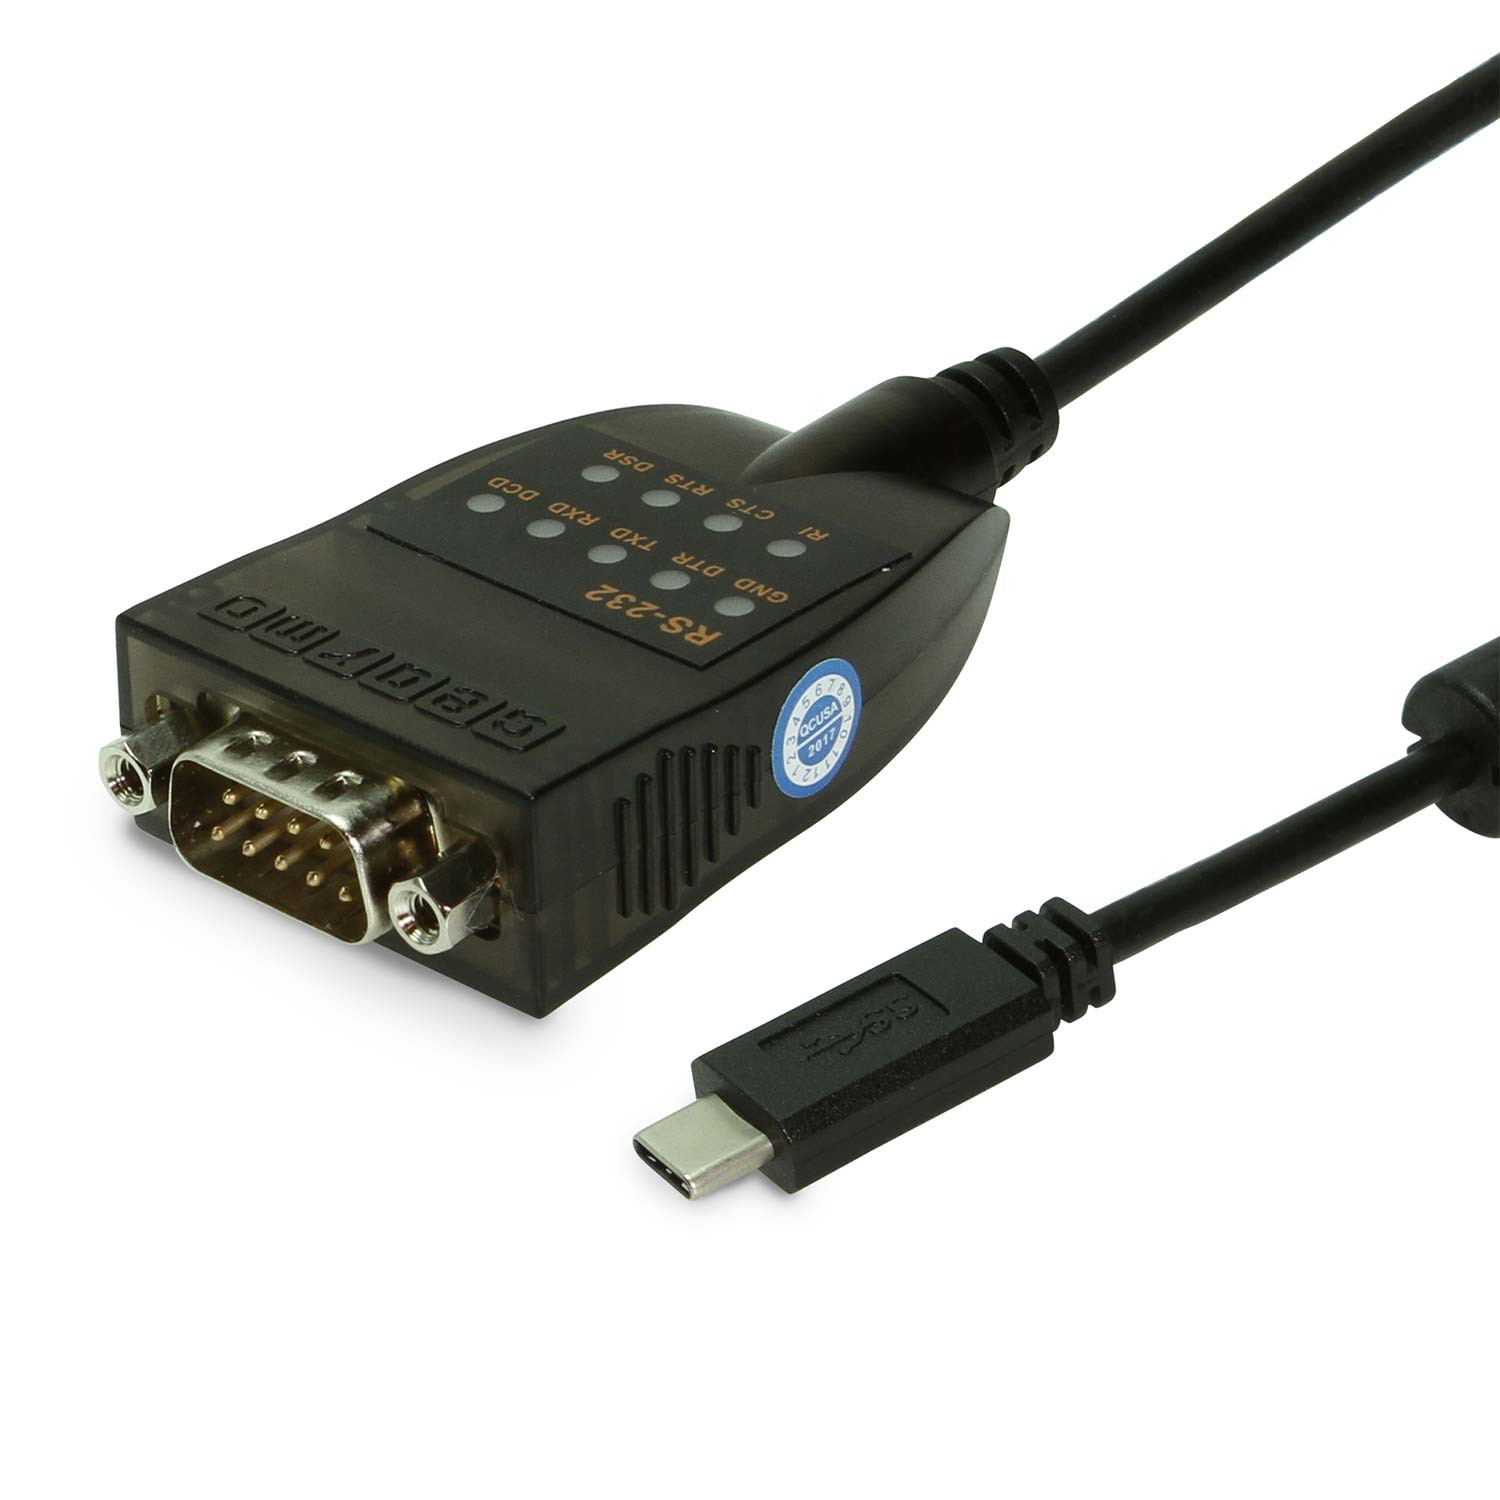 USB-C 2.0 to Serial RS-232 Adapter w/ LED Indicators